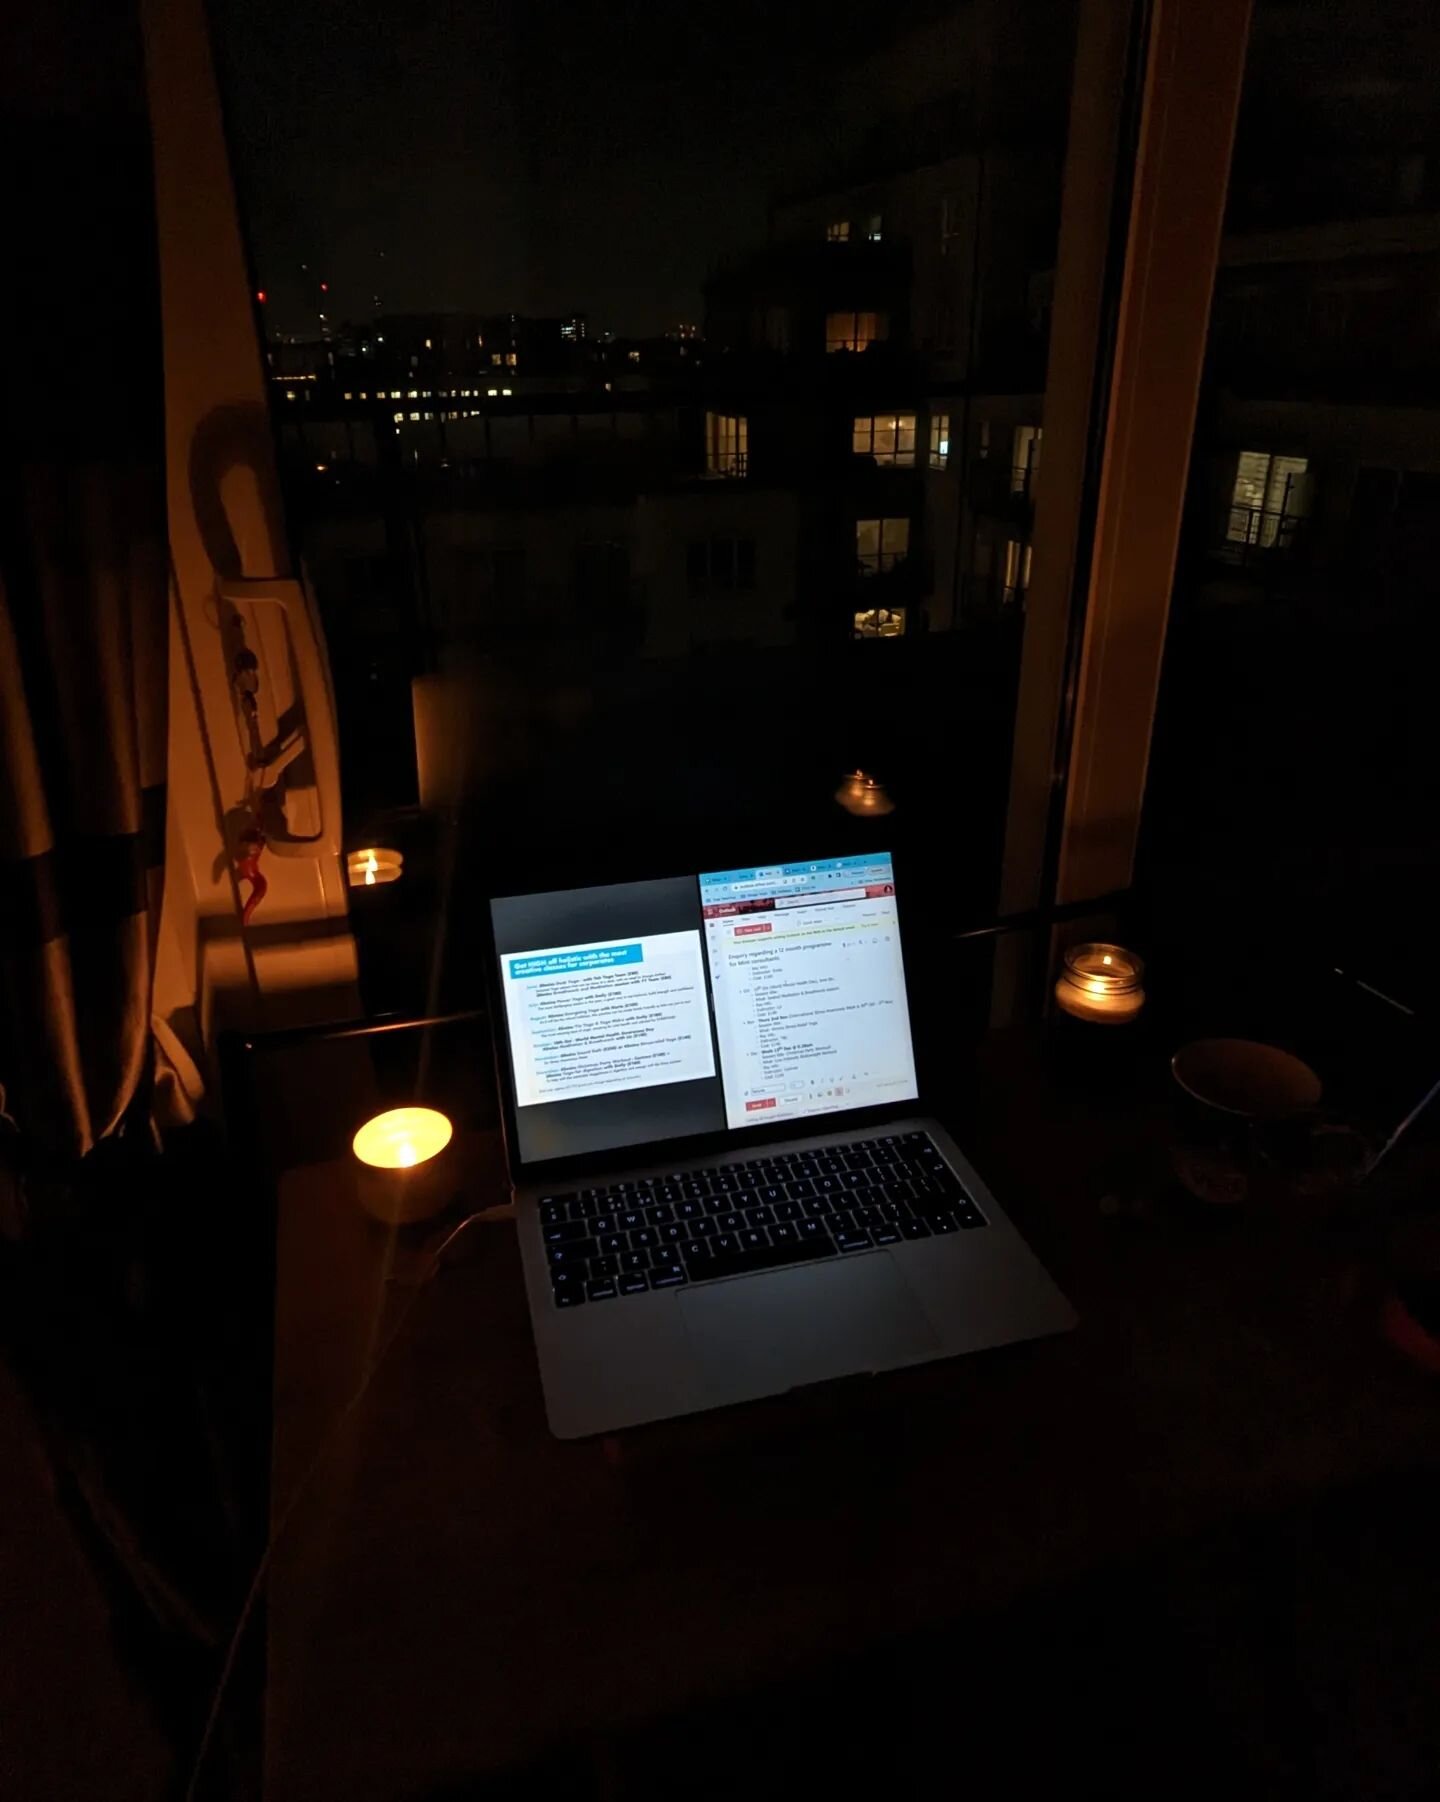 Planning an epic year-long program of wellness events for our newest client today - who likes the dark and moody WFH set up we've got going on here??

As a founder, I'm often working alone at home or in coffee shops (wework is SOOO pricey!) - I for o